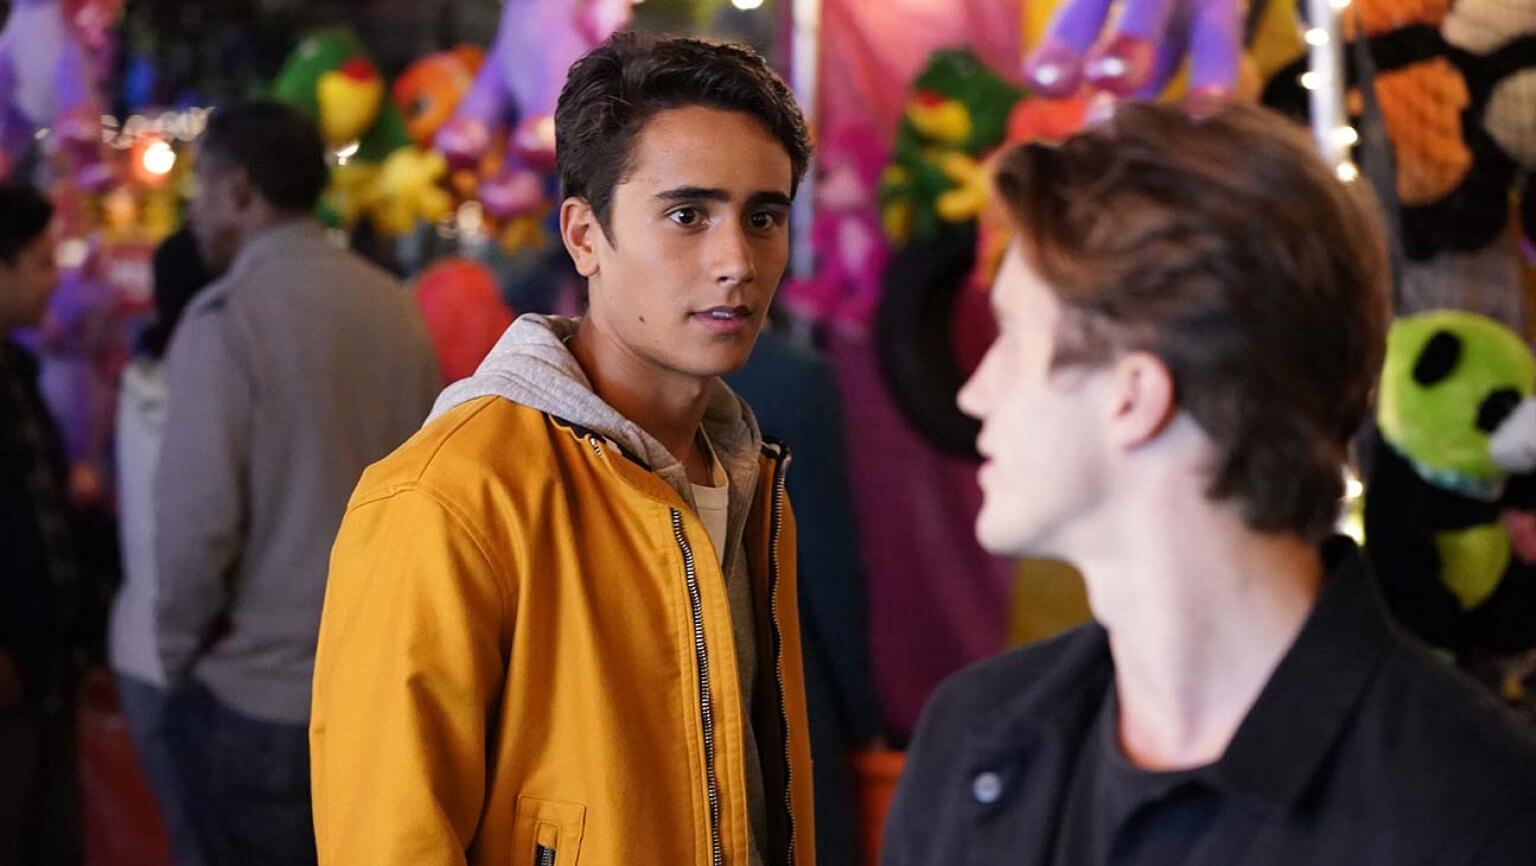 Disney+ ‘Love, Simon’ Series Now Titled ‘Love, Victor’ Moves To Hulu